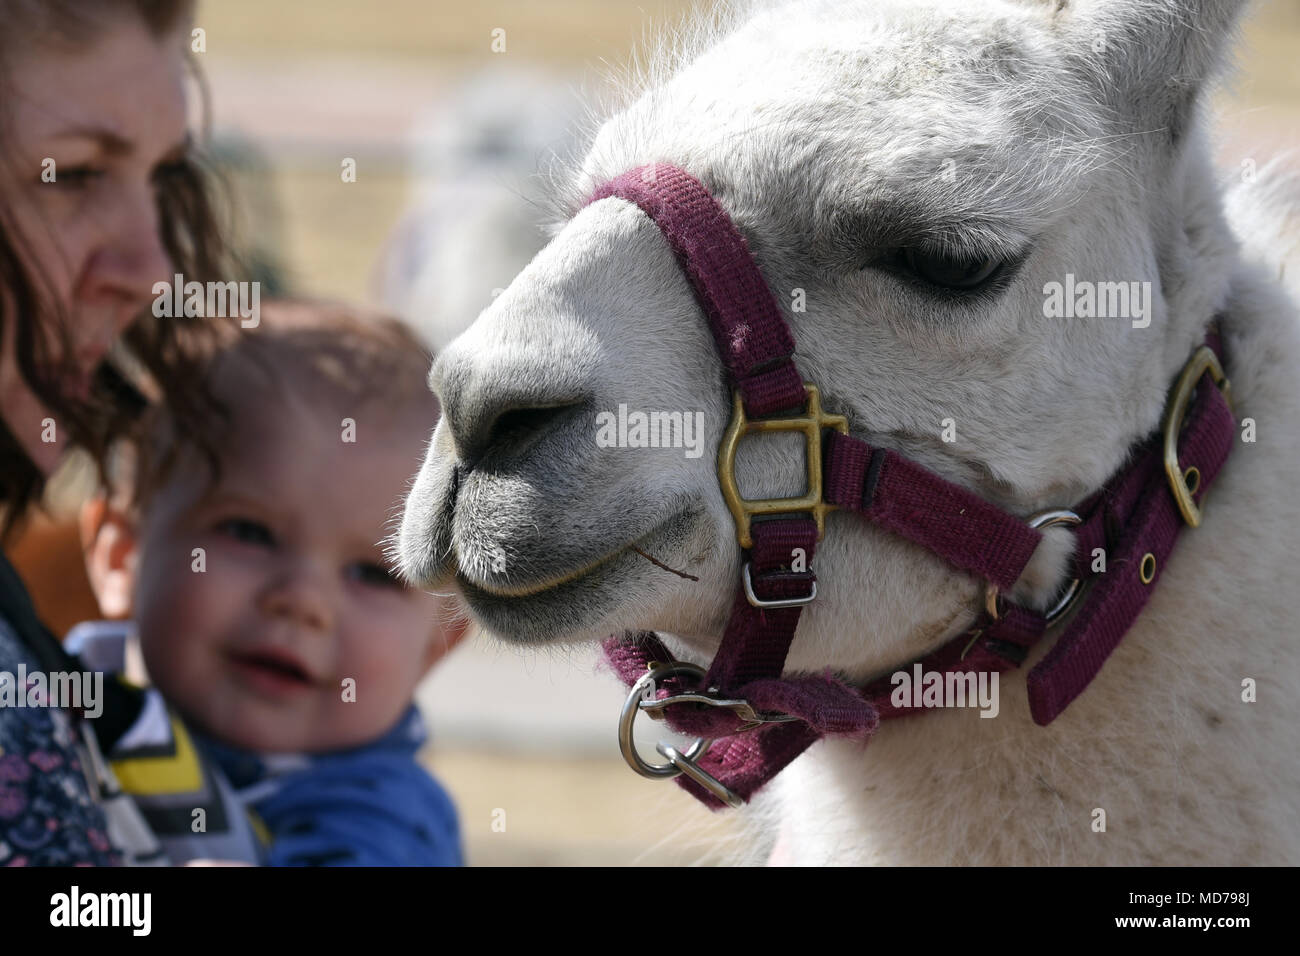 “Peek-a-boo” the llama gazes on while Amber Specht and her son Levi, 1, watch in fascination during the 50th Force Support Squadron’s Spring Fling event at Schriever Air Force Base, Colorado, March 24, 2018. Animals and people alike enjoyed the day’s fair weather with a variety of outdoor activities. (U.S. Air Force photo by Airman 1st Class William Tracy) Stock Photo